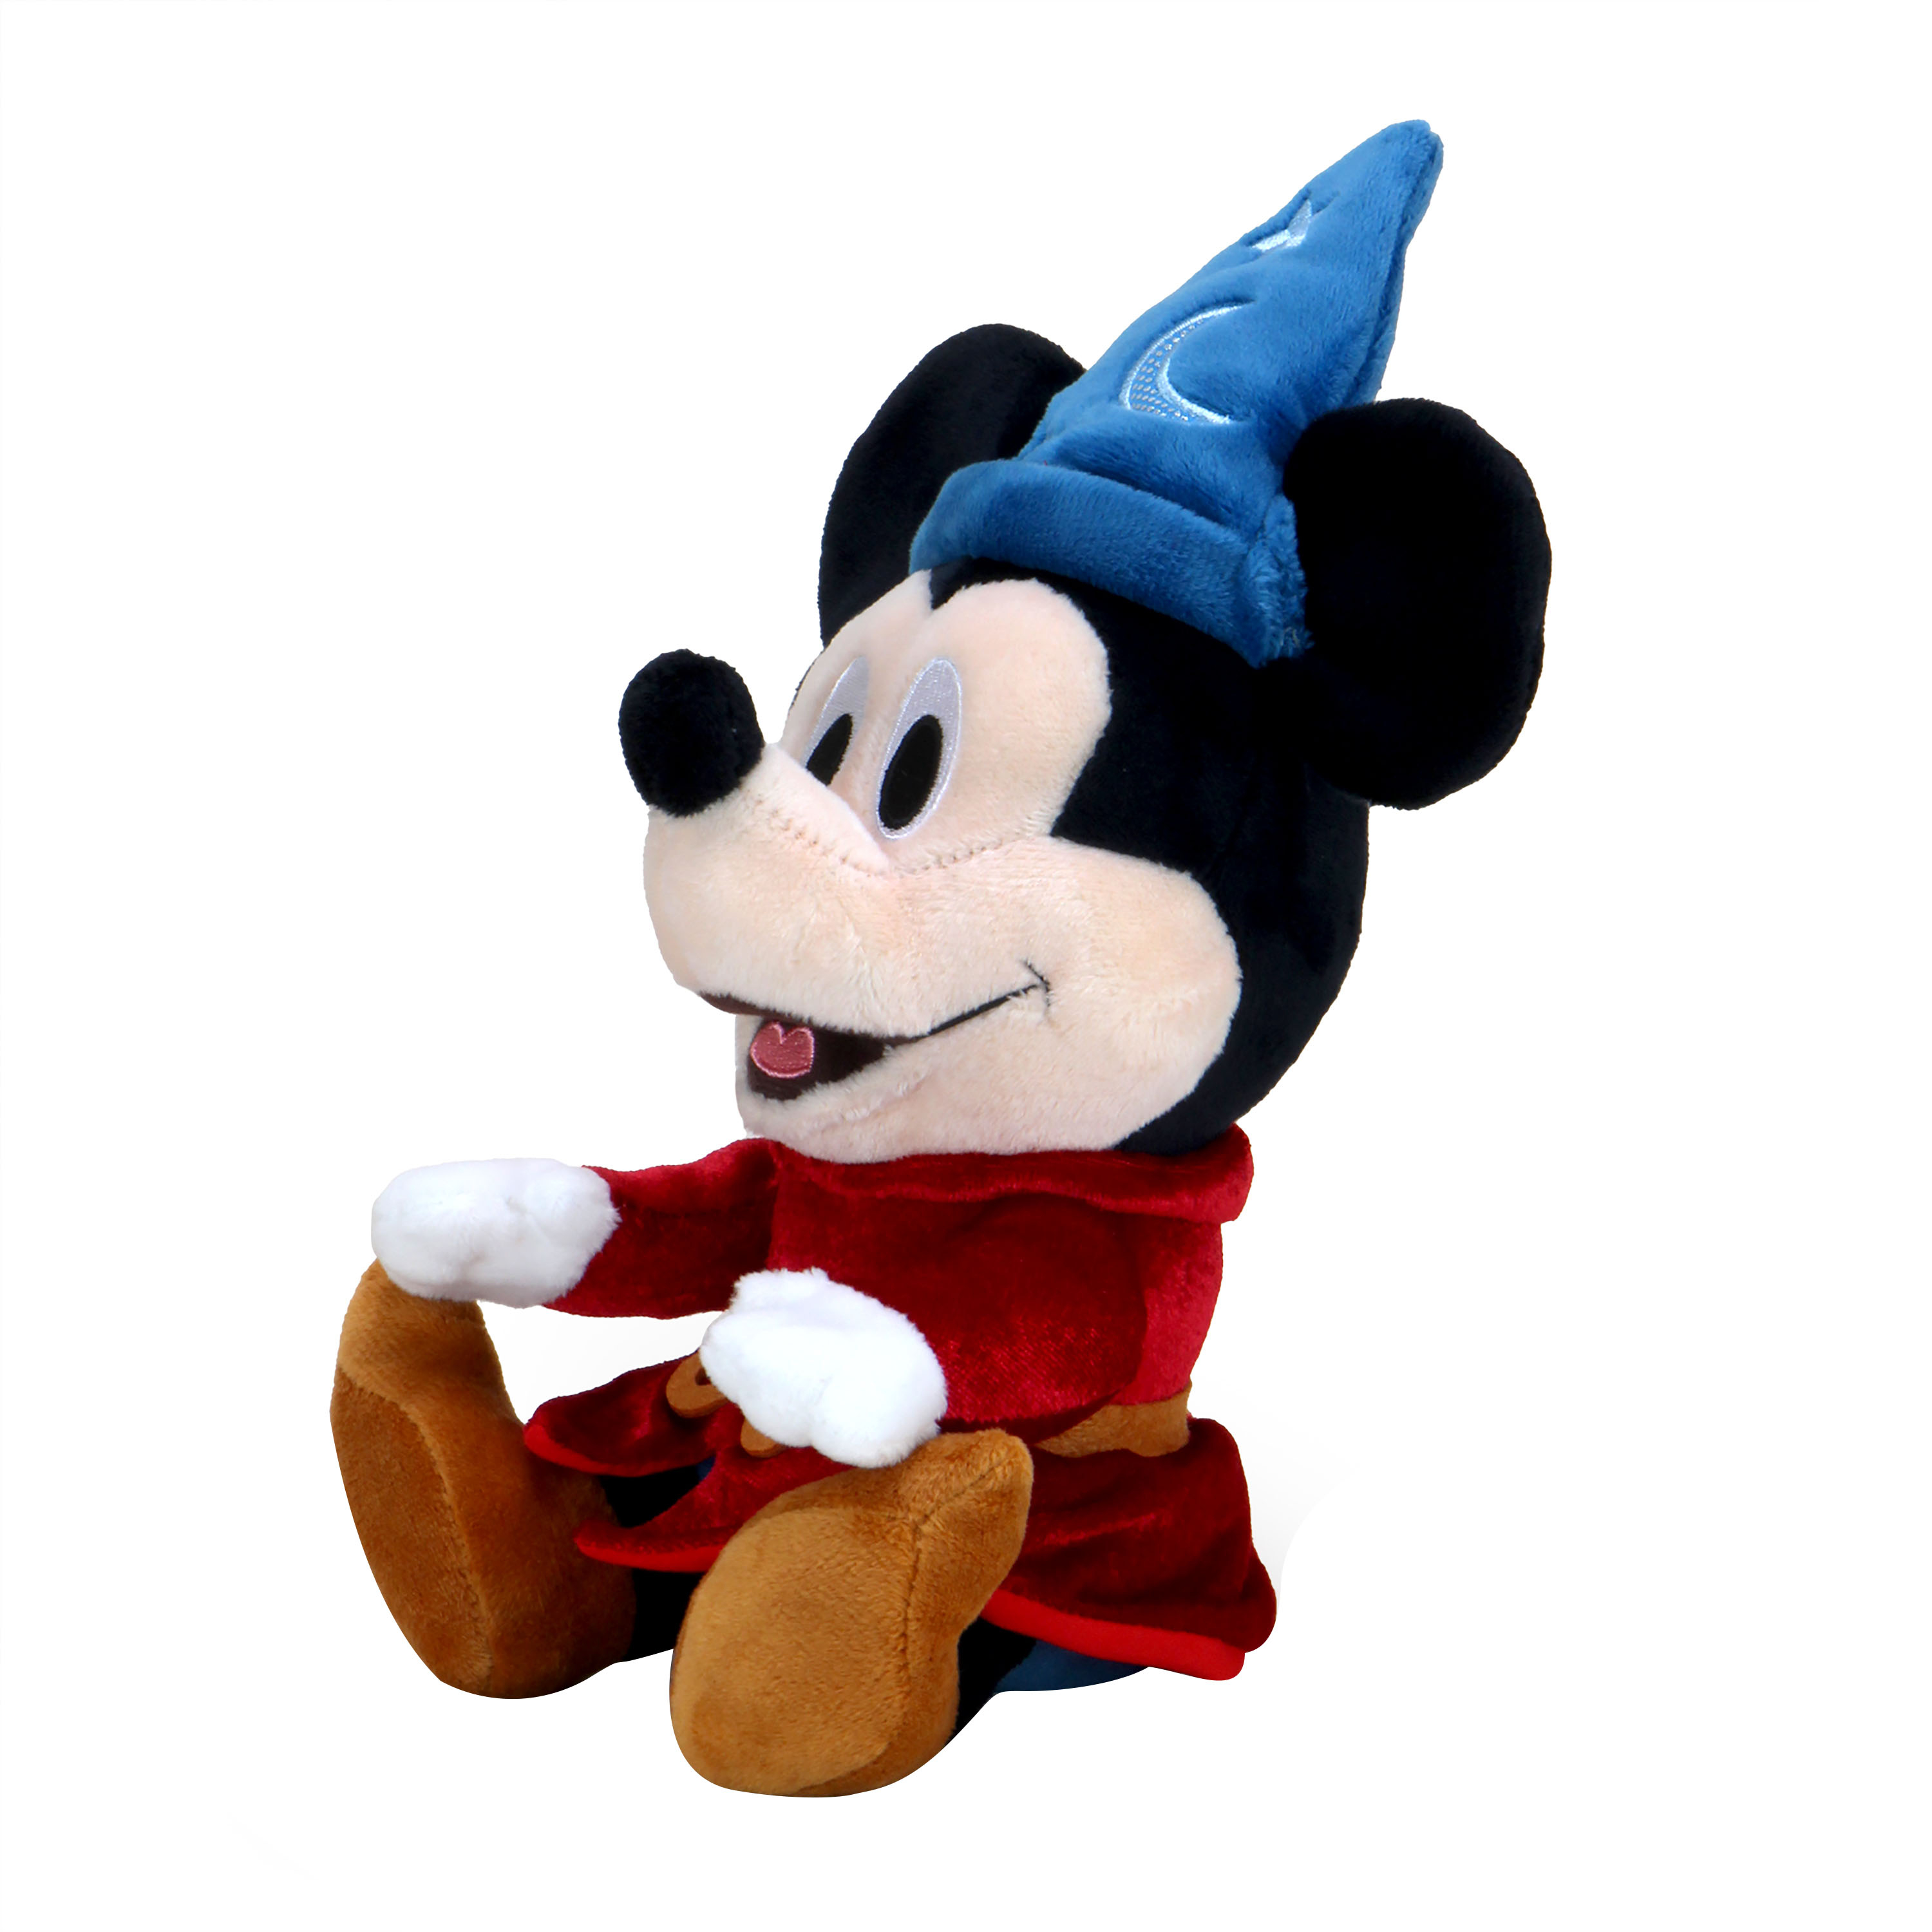 Disney Store Official Fantasia Collection: Medium 22-inch Sorcerer Mickey Mouse Plush - Authentic, Soft & Cuddly Toy - Ideal for Fans & Kids